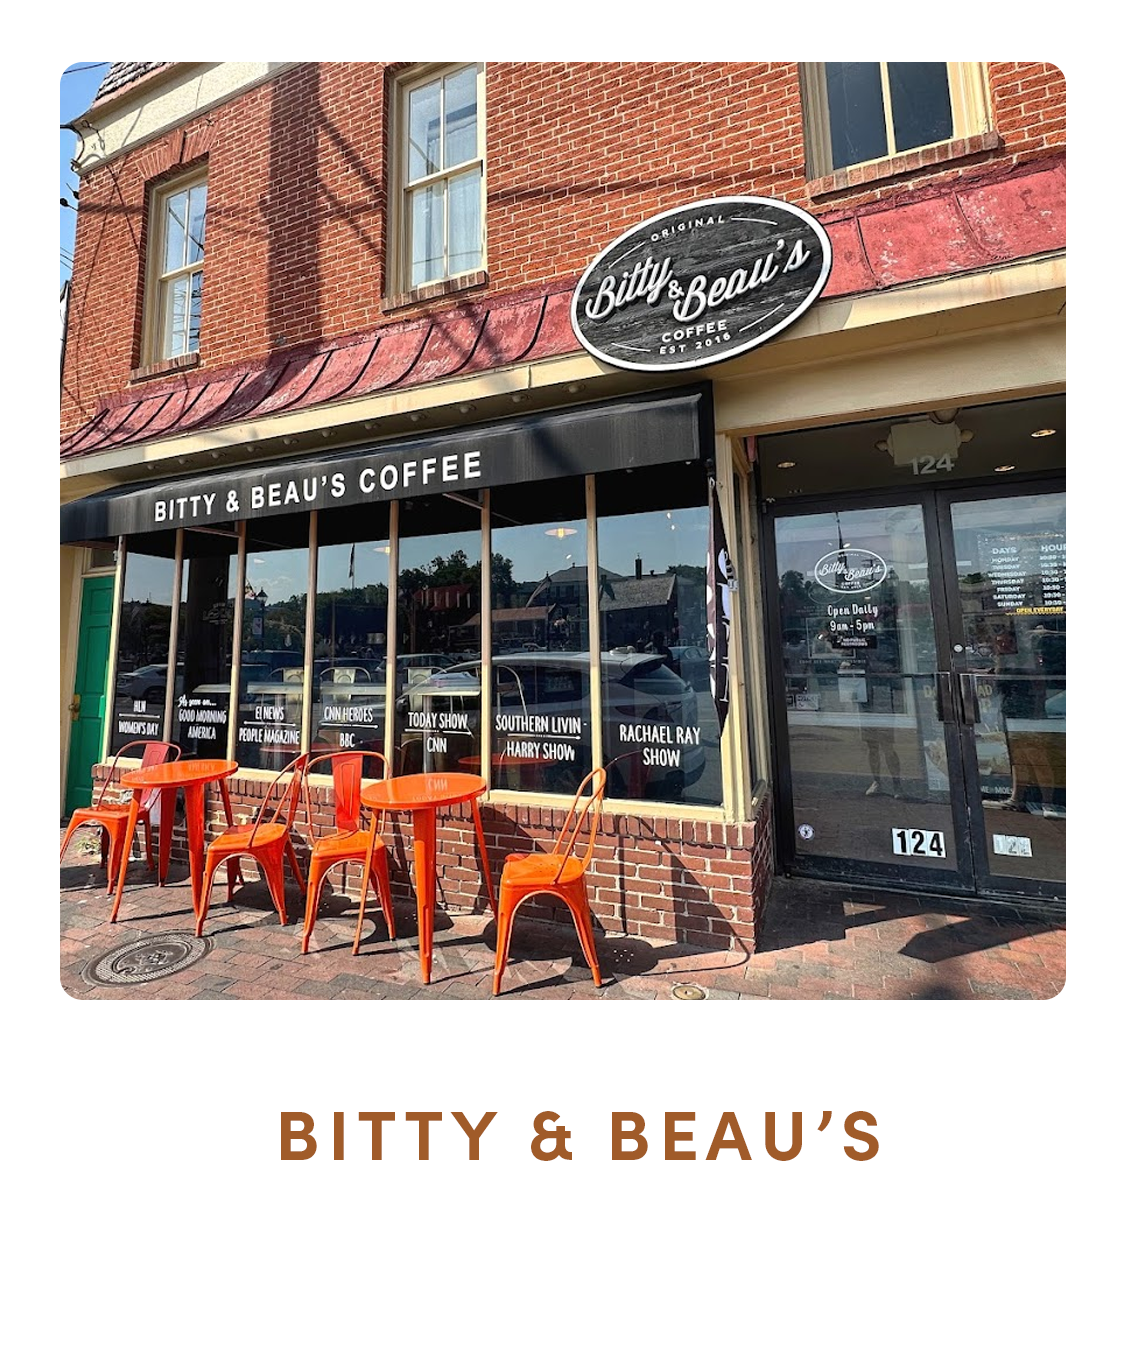 annapolis-coffee-shops-bitty-beaus